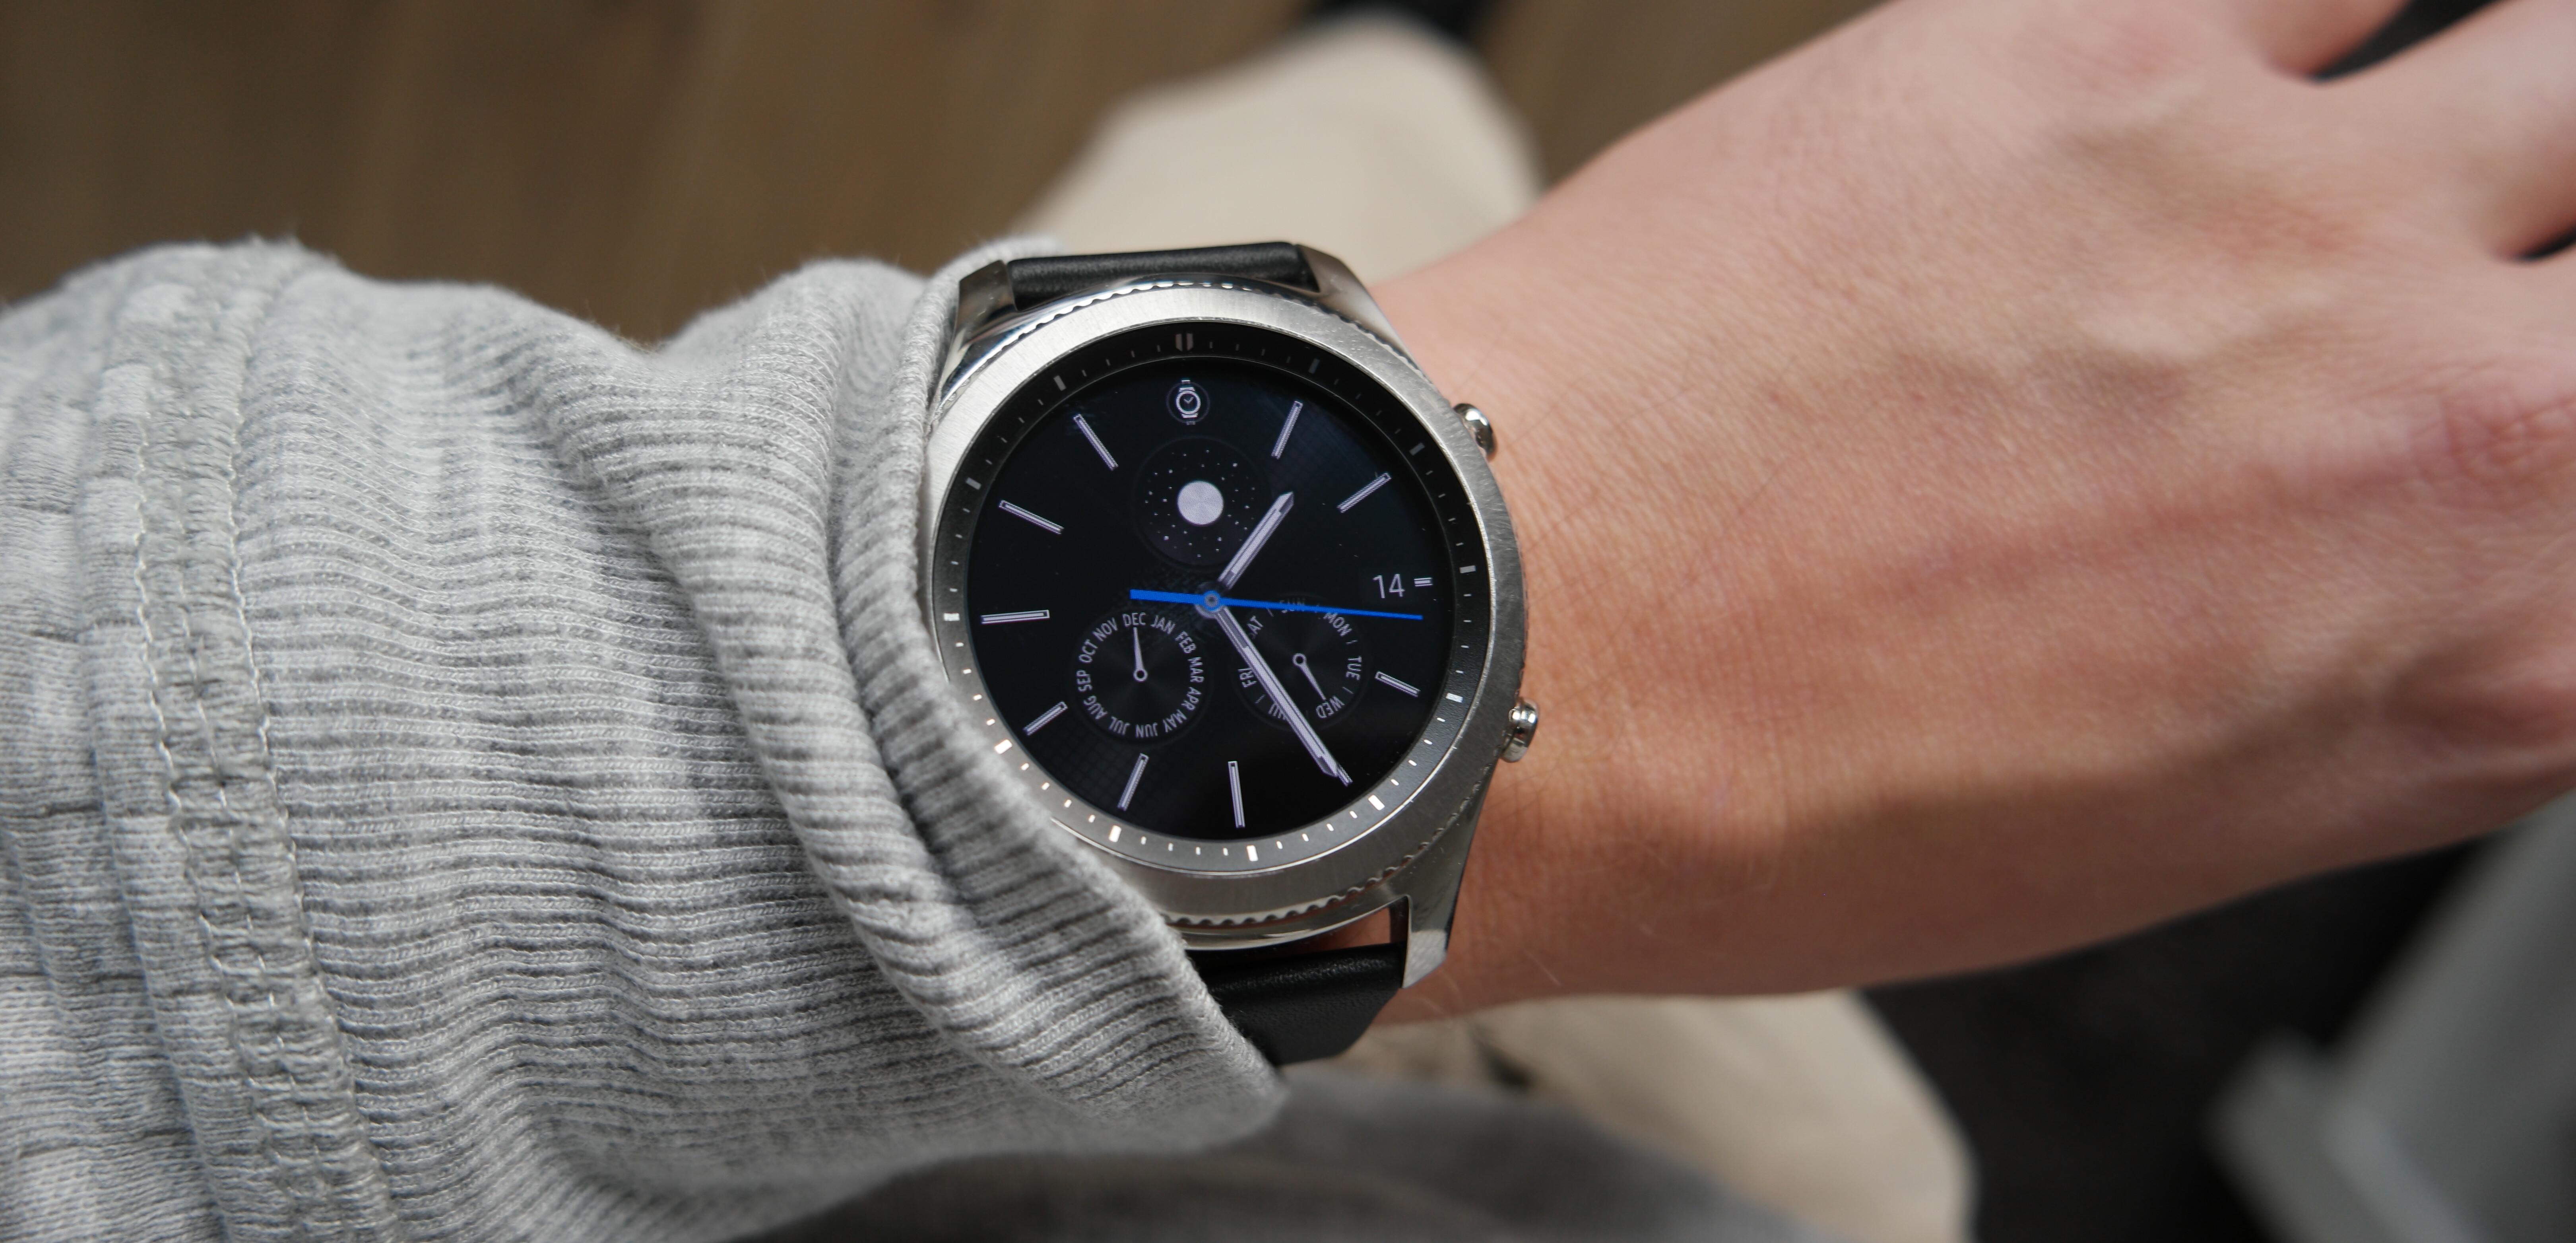 Samsung Gear S3 classic review: The smartwatch we've all waiting for - - SamMobile